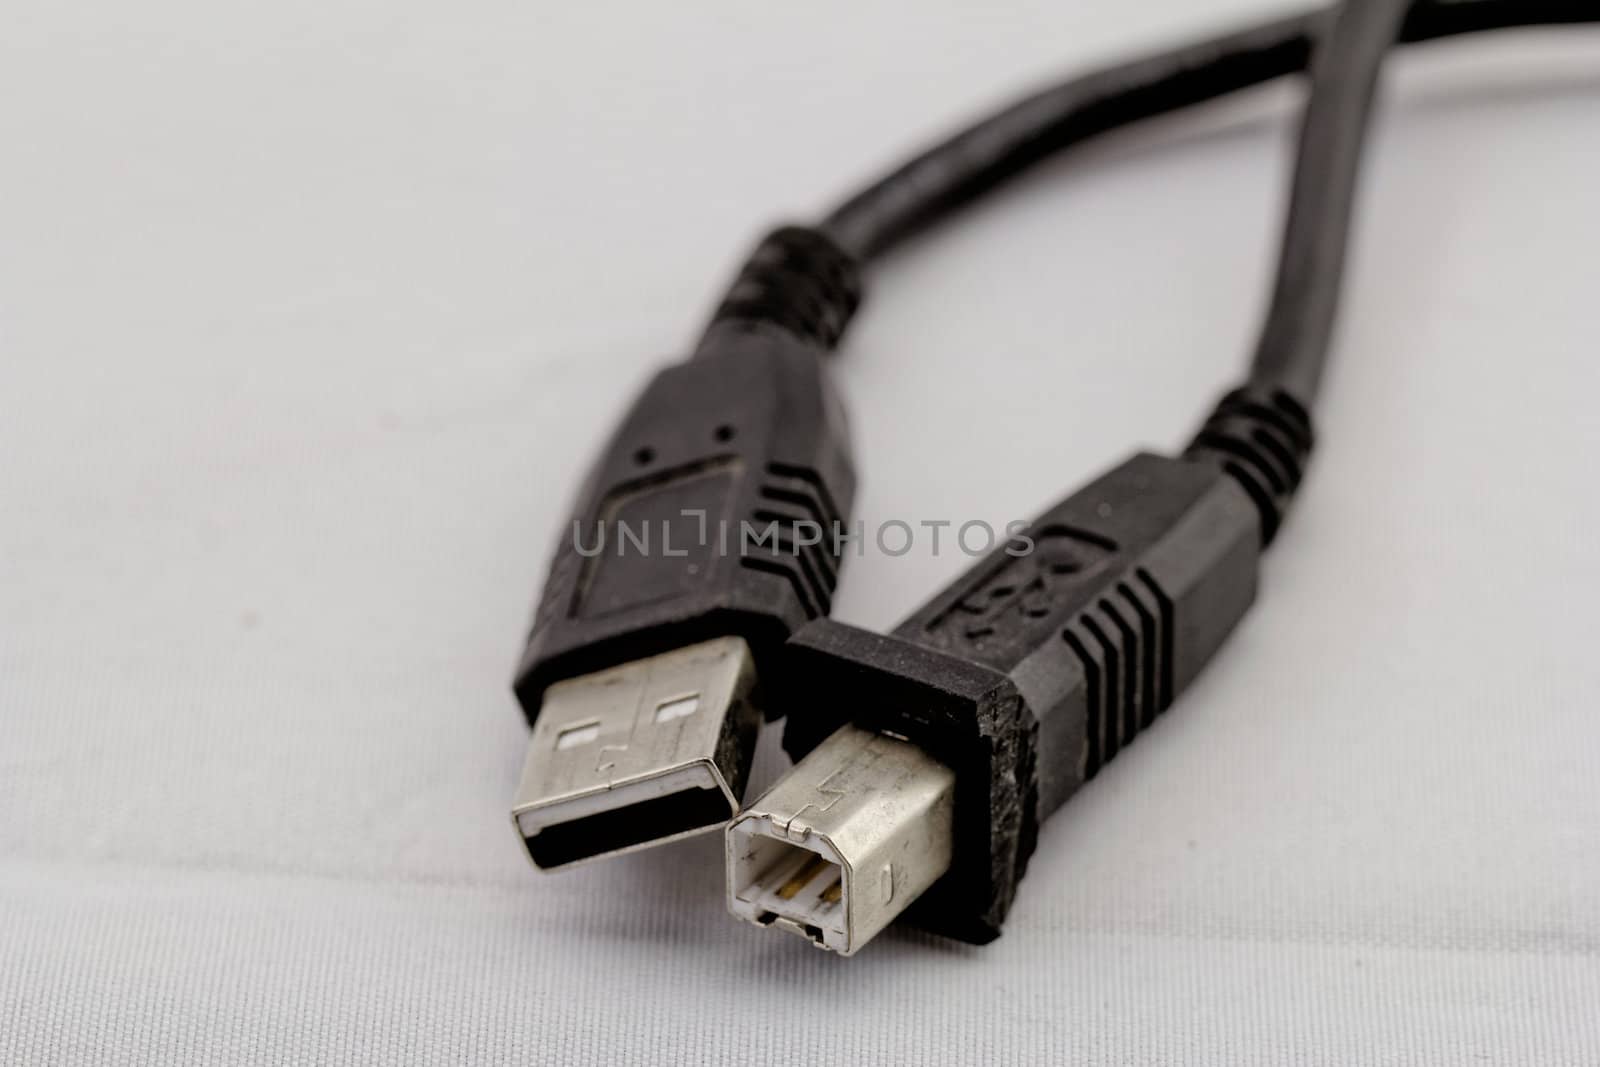 black usb printer cable on white background (a, b)